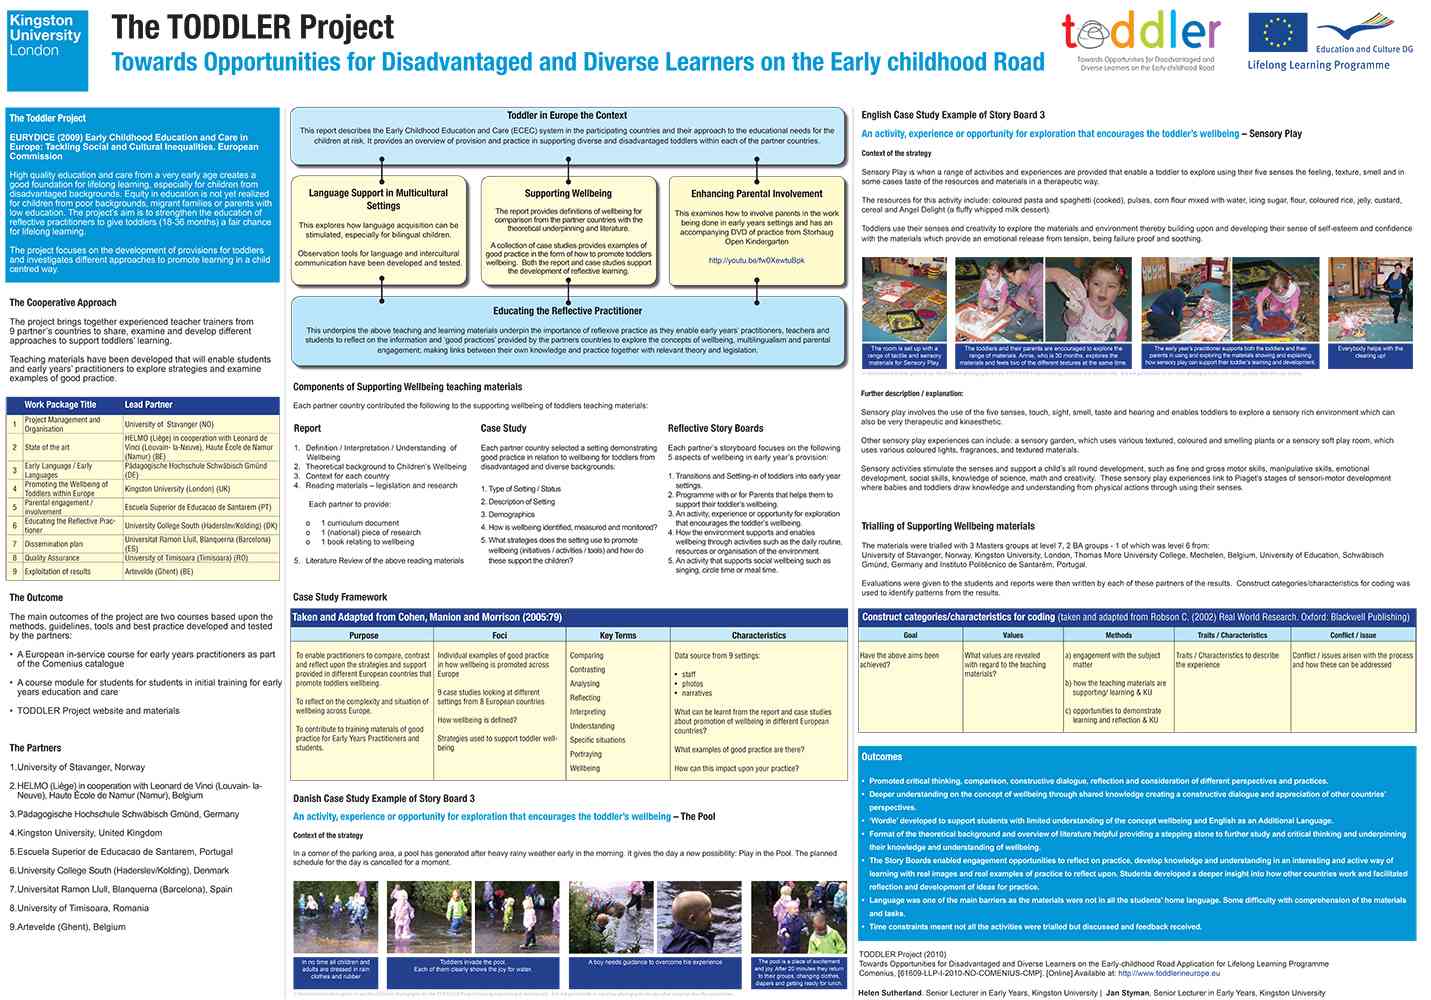 TODDLER Project - TODDLER Project poster on the Intellectual Output lead by Kingston University.